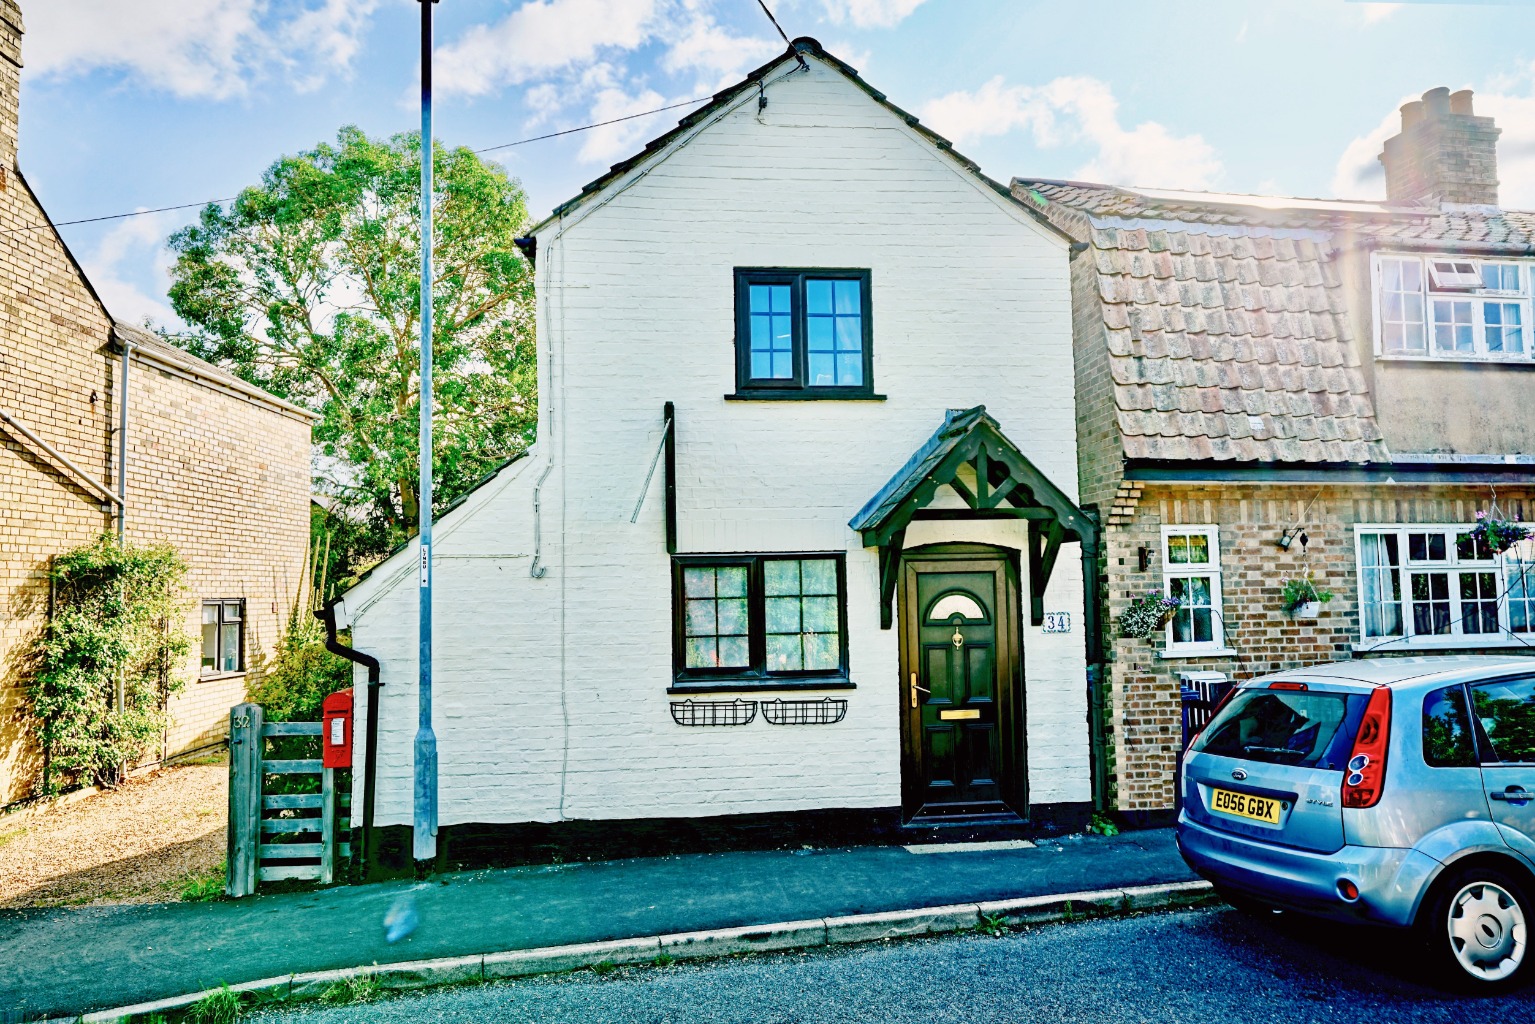 **CHARMING TWO BED COTTAGE IN PEACEFUL VILLAGE LOCATION OF OFFORD D'ARCY** Short stroll to local amenities, nearby parks, schools and an award winning pub***log burner and bright sun lounge with french doors extending out onto private garden***